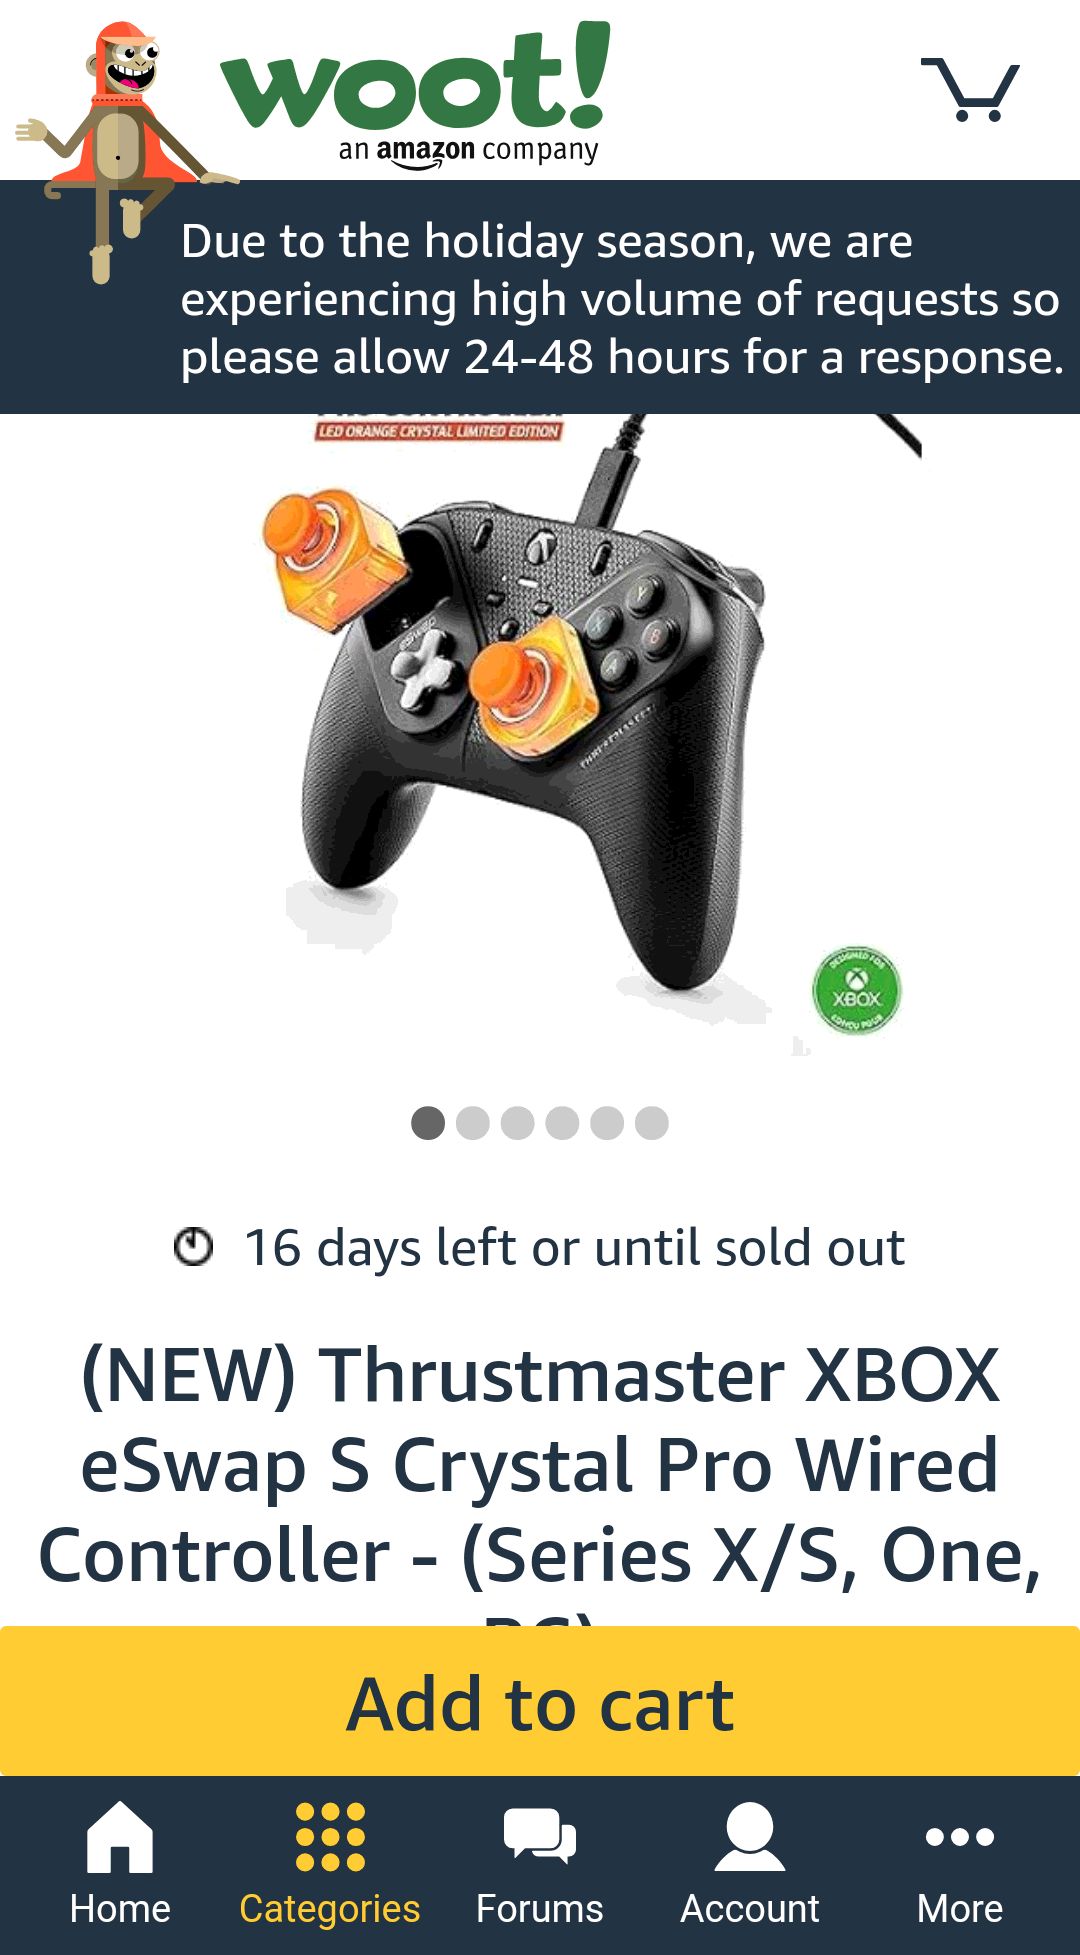 (NEW) Thrustmaster XBOX eSwap S Crystal Pro Wired Controller - (Series X/S, One, PC)次世代手柄